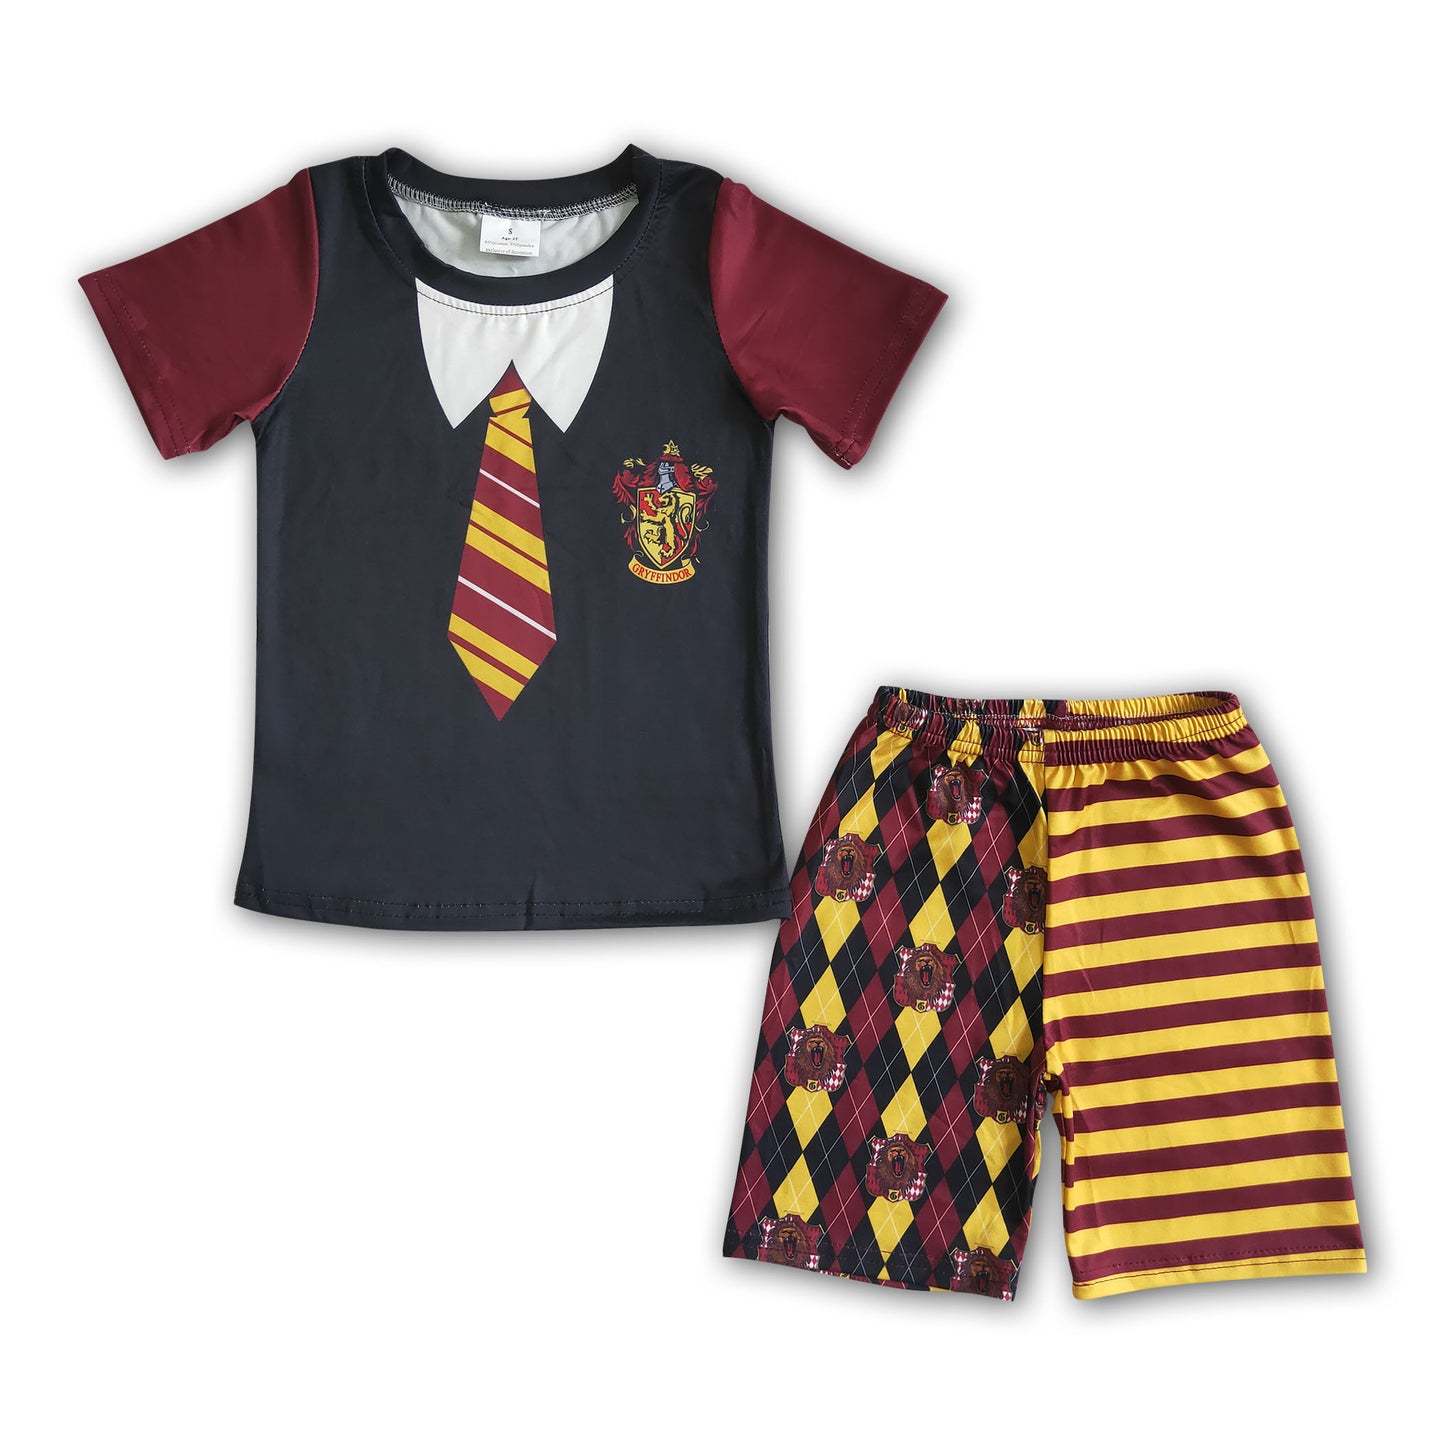 Black maroon yellow kids boys summer outfits